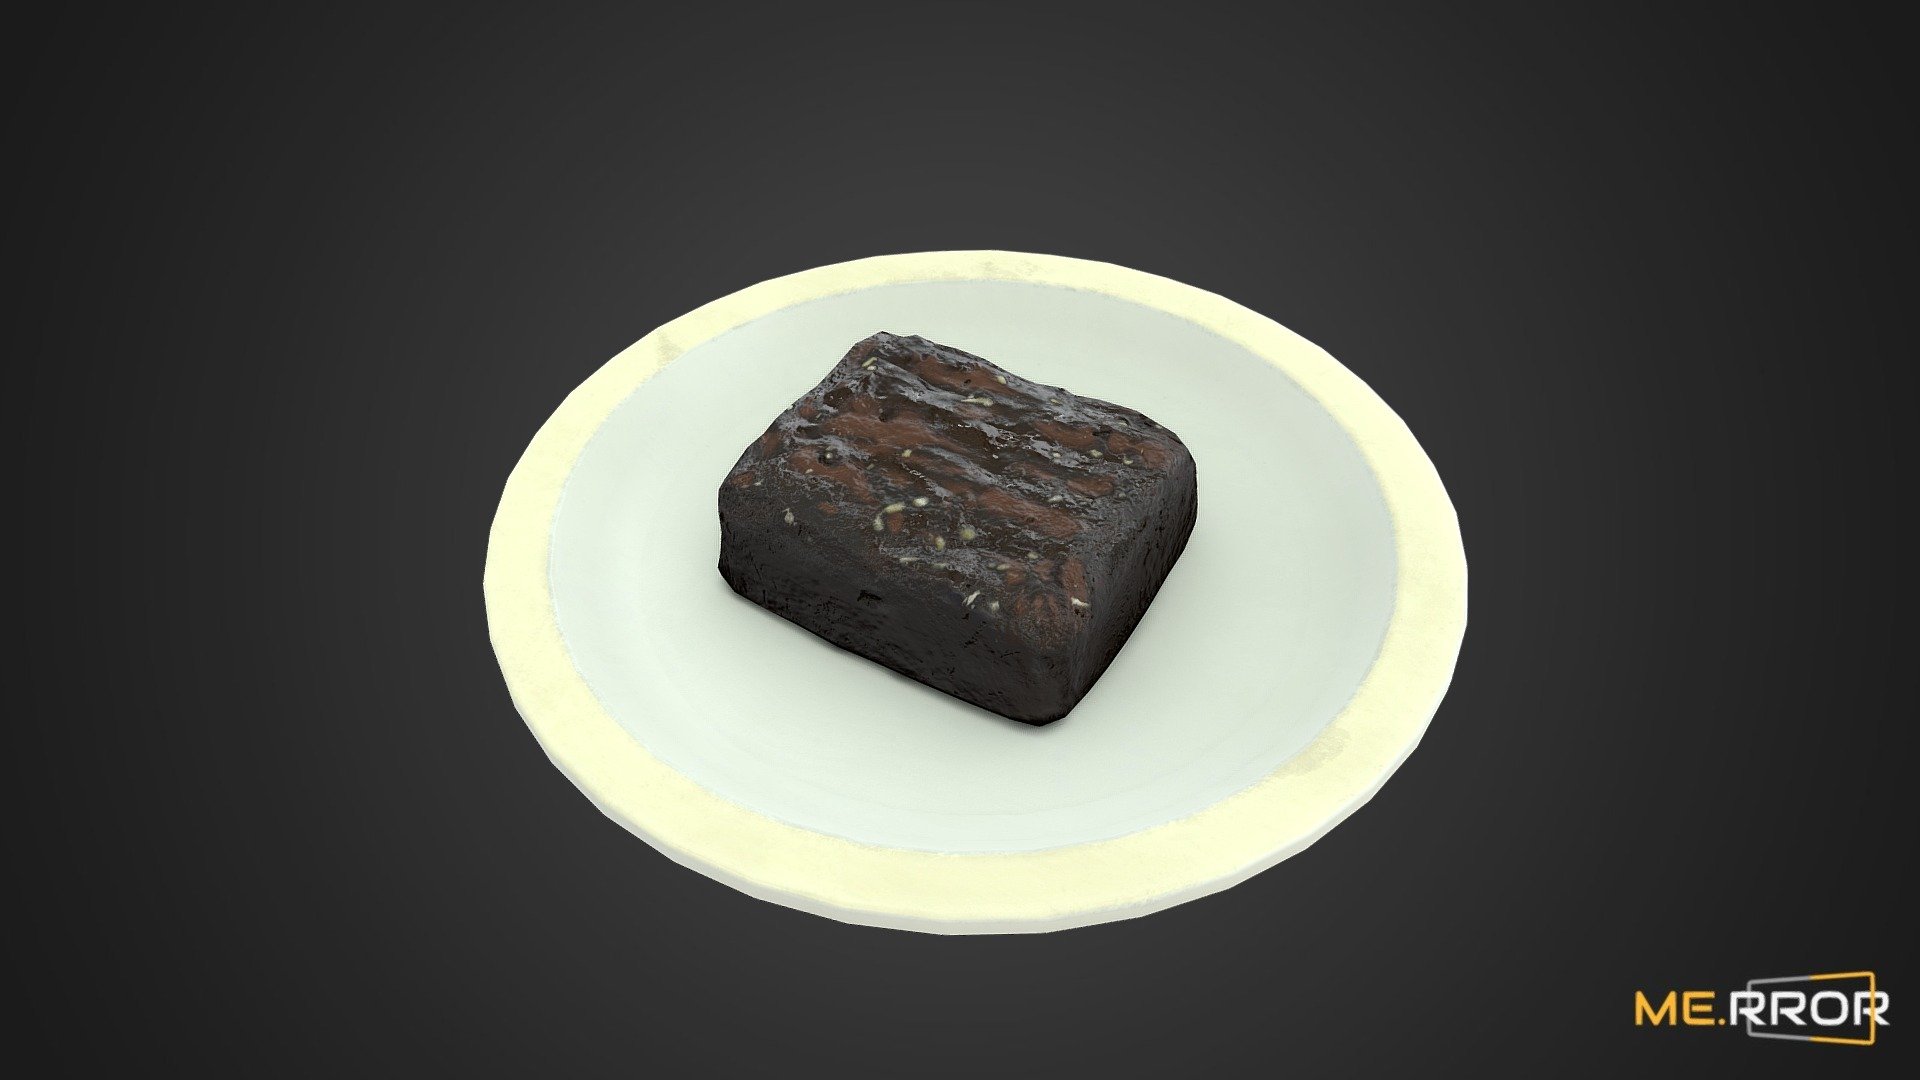 MERROR is a 3D Content PLATFORM which introduces various Asian assets to the 3D world

#3DScanning #Photogrametry #ME.RROR - [Game-Ready] Brownie - Buy Royalty Free 3D model by ME.RROR Studio (@merror) 3d model